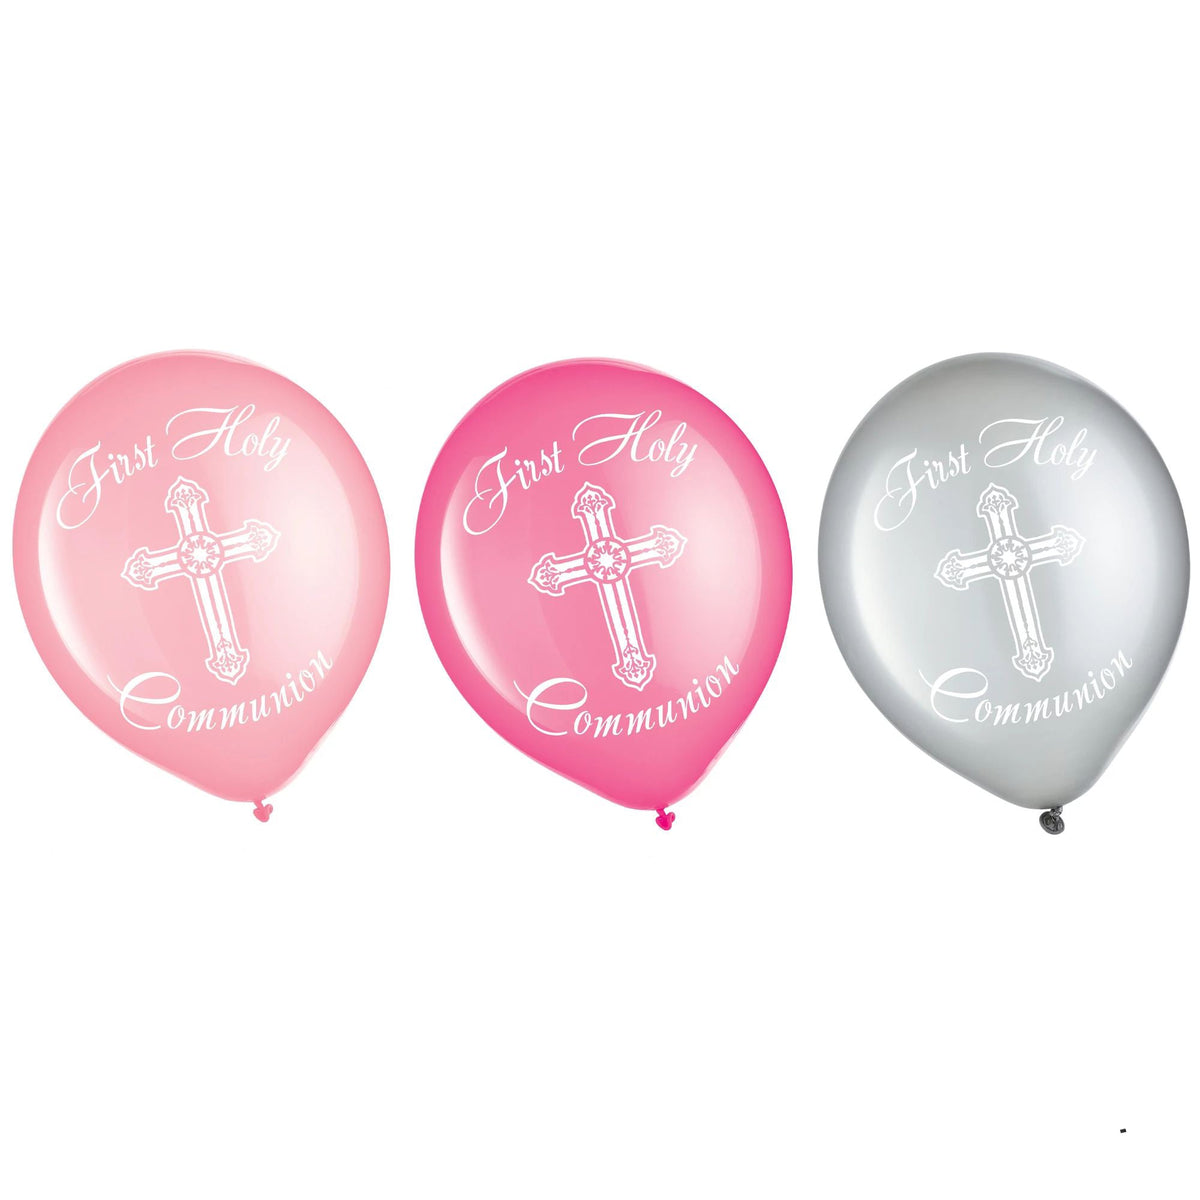 AMSCAN CA Religious Pink Communion Printed Latex Balloons, Pink and Grey, 12 Inches, 15 Count 048419740100